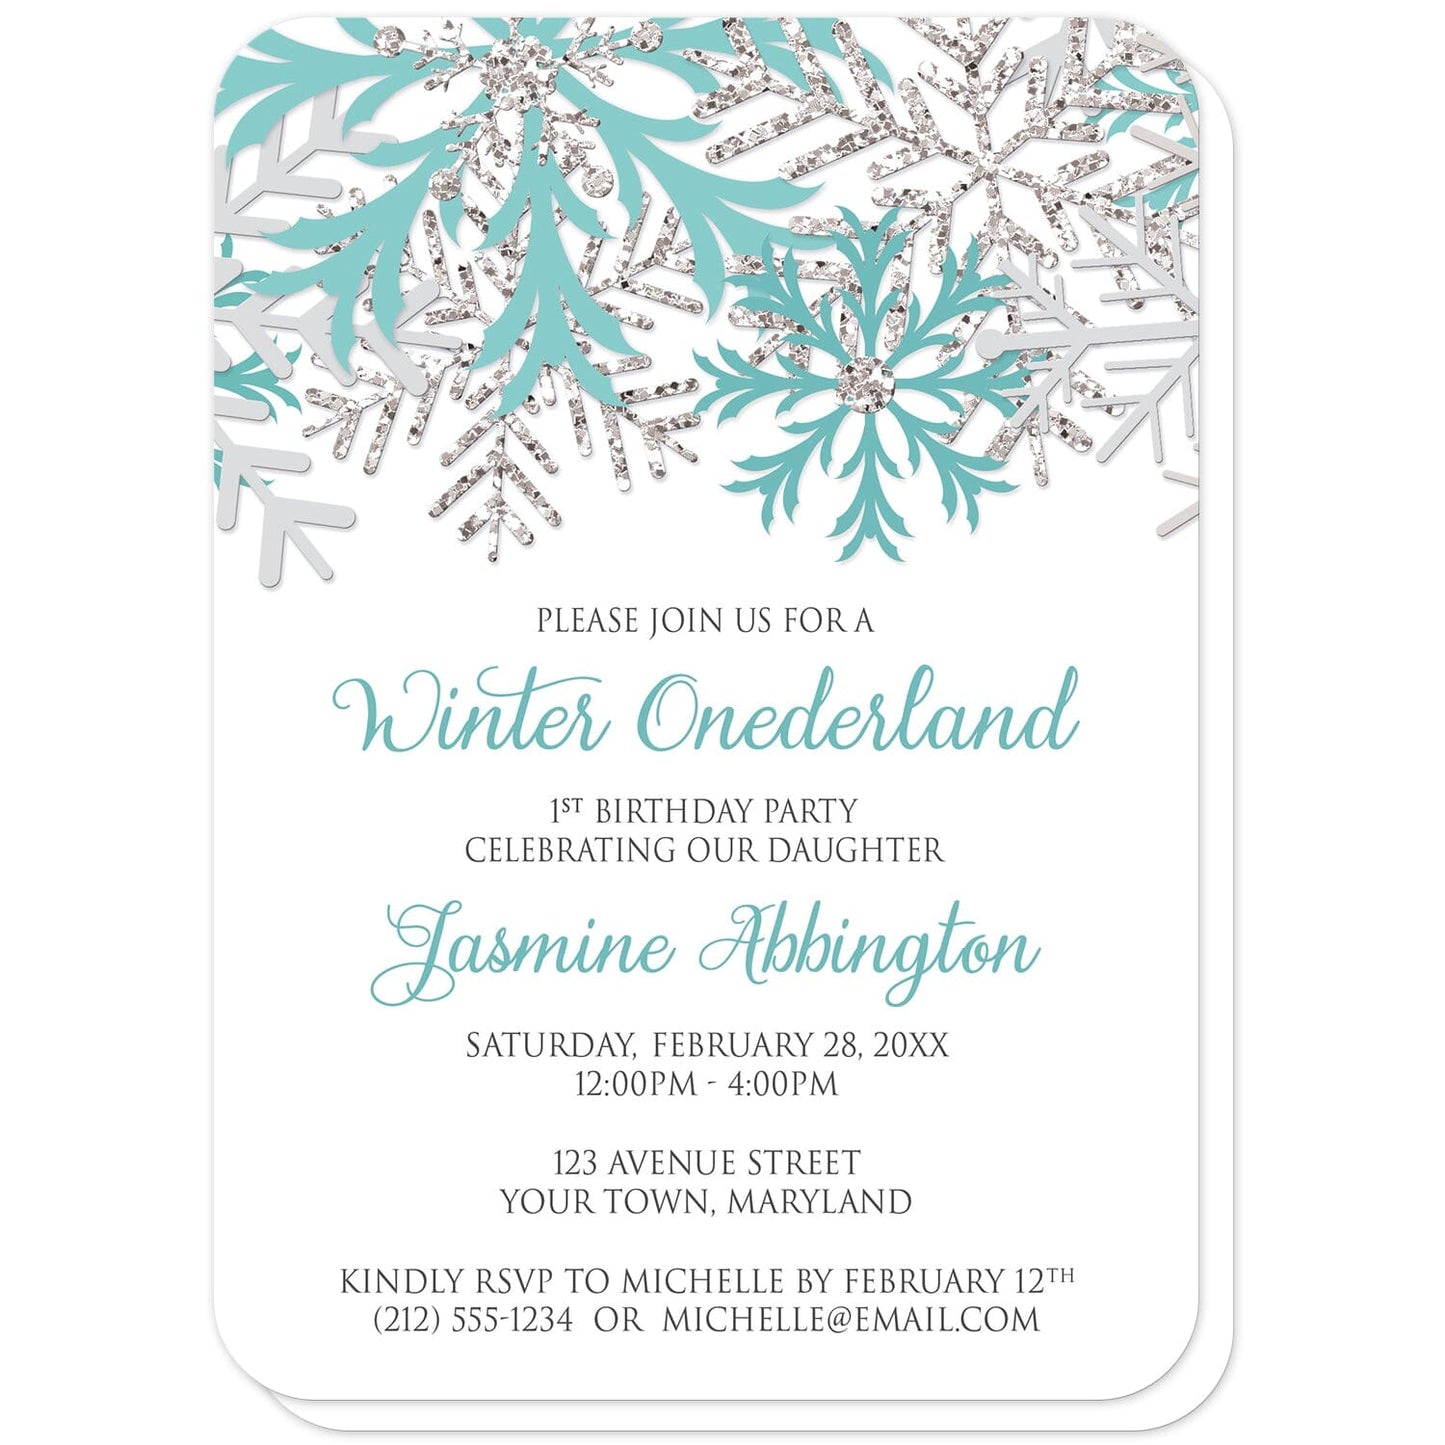 Teal Silver Snowflake 1st Birthday Winter Onederland Invitations (with rounded corners) at Artistically Invited. Pretty teal silver snowflake 1st birthday Winter Onederland invitations designed with teal, light teal, silver-colored glitter-illustrated, and light gray snowflakes along the top of the invitations. Your personalized 1st birthday party details are custom printed in teal and gray on white below the snowflakes.